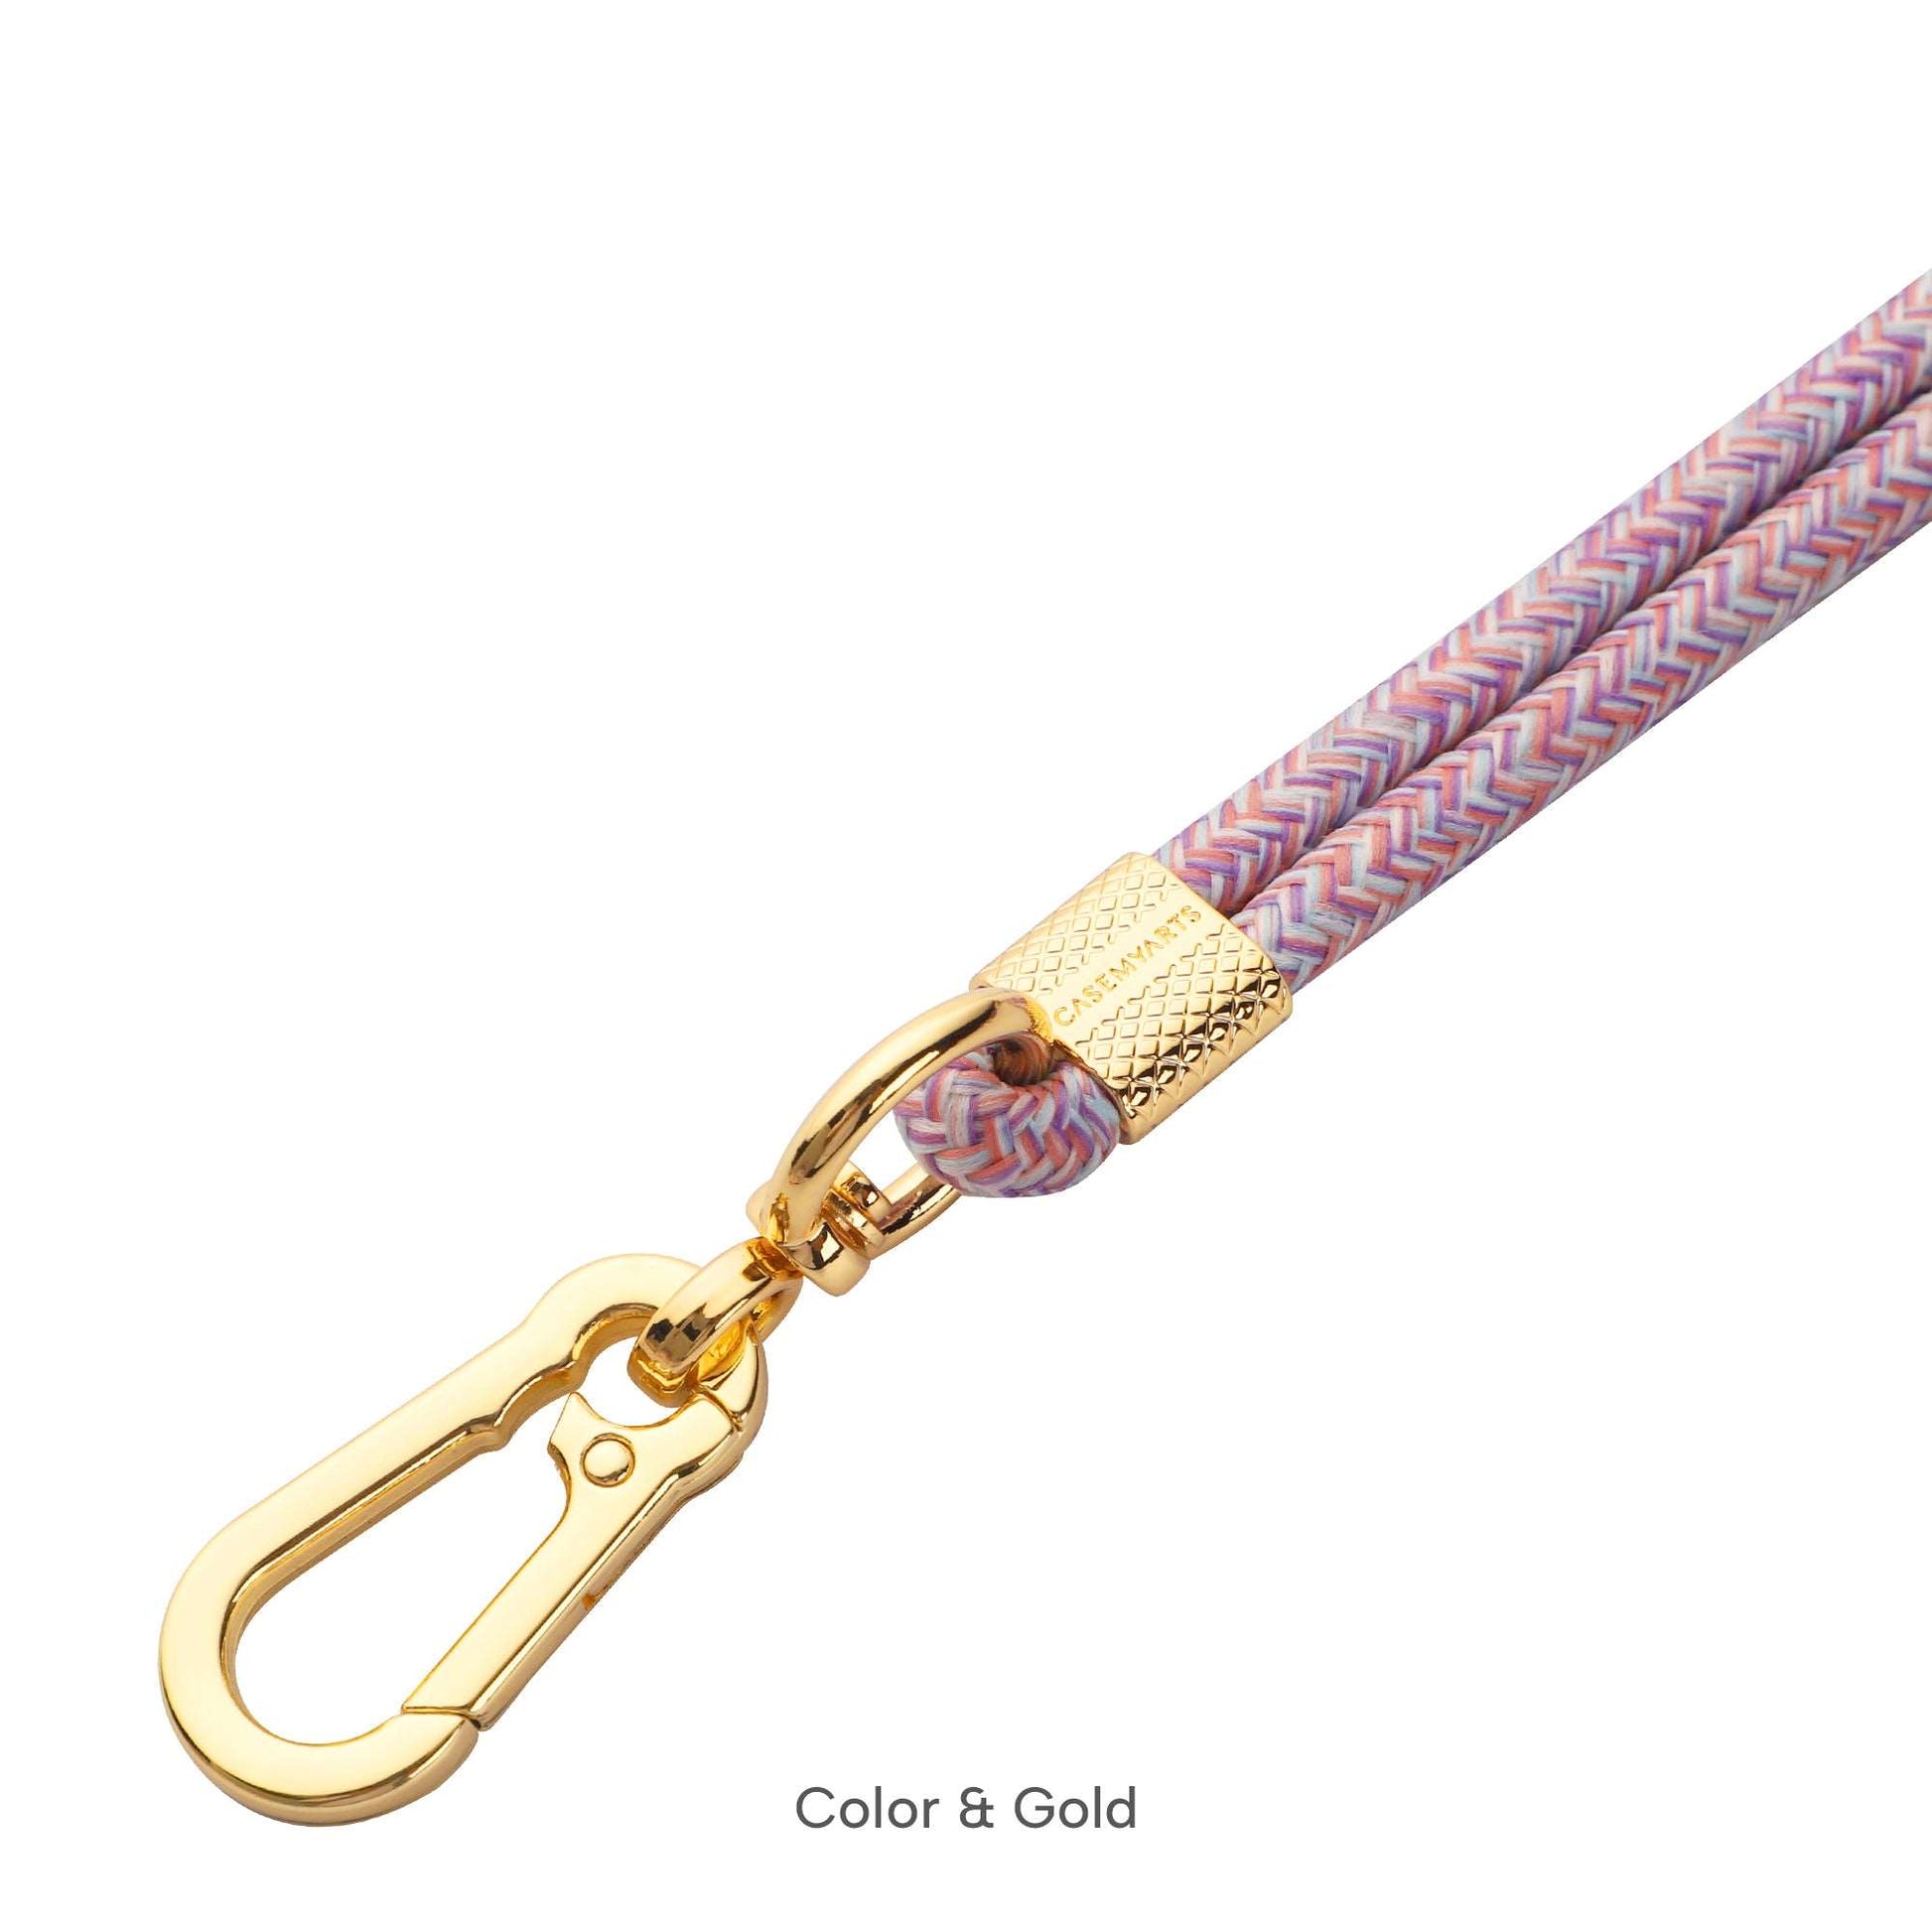 CASEMYARTS Rope Wrist Strap with tether tab